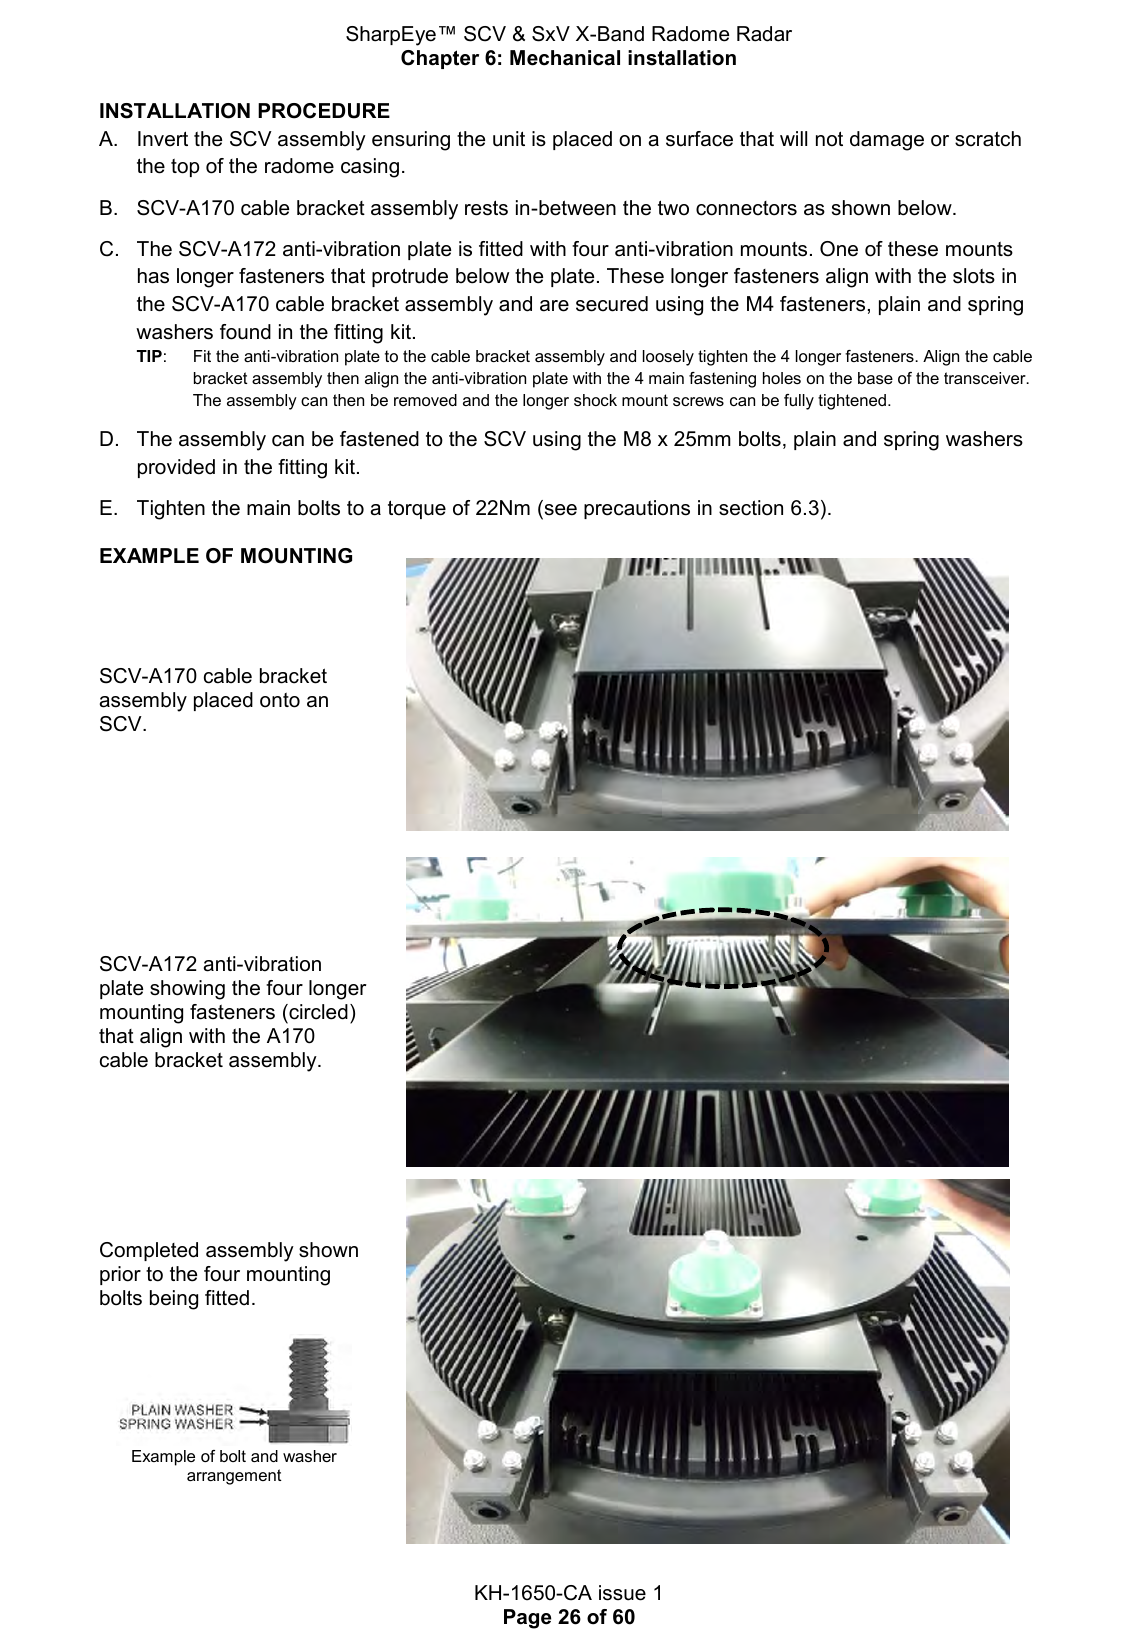 SharpEye™ SCV &amp; SxV X-Band Radome Radar Chapter 6: Mechanical installation  KH-1650-CA issue 1 Page 26 of 60 INSTALLATION PROCEDURE  A.  Invert the SCV assembly ensuring the unit is placed on a surface that will not damage or scratch the top of the radome casing.  B.  SCV-A170 cable bracket assembly rests in-between the two connectors as shown below.  C.  The SCV-A172 anti-vibration plate is fitted with four anti-vibration mounts. One of these mounts has longer fasteners that protrude below the plate. These longer fasteners align with the slots in the SCV-A170 cable bracket assembly and are secured using the M4 fasteners, plain and spring washers found in the fitting kit. TIP:   Fit the anti-vibration plate to the cable bracket assembly and loosely tighten the 4 longer fasteners. Align the cable bracket assembly then align the anti-vibration plate with the 4 main fastening holes on the base of the transceiver. The assembly can then be removed and the longer shock mount screws can be fully tightened.    D.  The assembly can be fastened to the SCV using the M8 x 25mm bolts, plain and spring washers provided in the fitting kit.  E.  Tighten the main bolts to a torque of 22Nm (see precautions in section 6.3). EXAMPLE OF MOUNTING      SCV-A170 cable bracket assembly placed onto an SCV.  SCV-A172 anti-vibration plate showing the four longer mounting fasteners (circled) that align with the A170 cable bracket assembly.  Completed assembly shown prior to the four mounting bolts being fitted.   Example of bolt and washer arrangement  